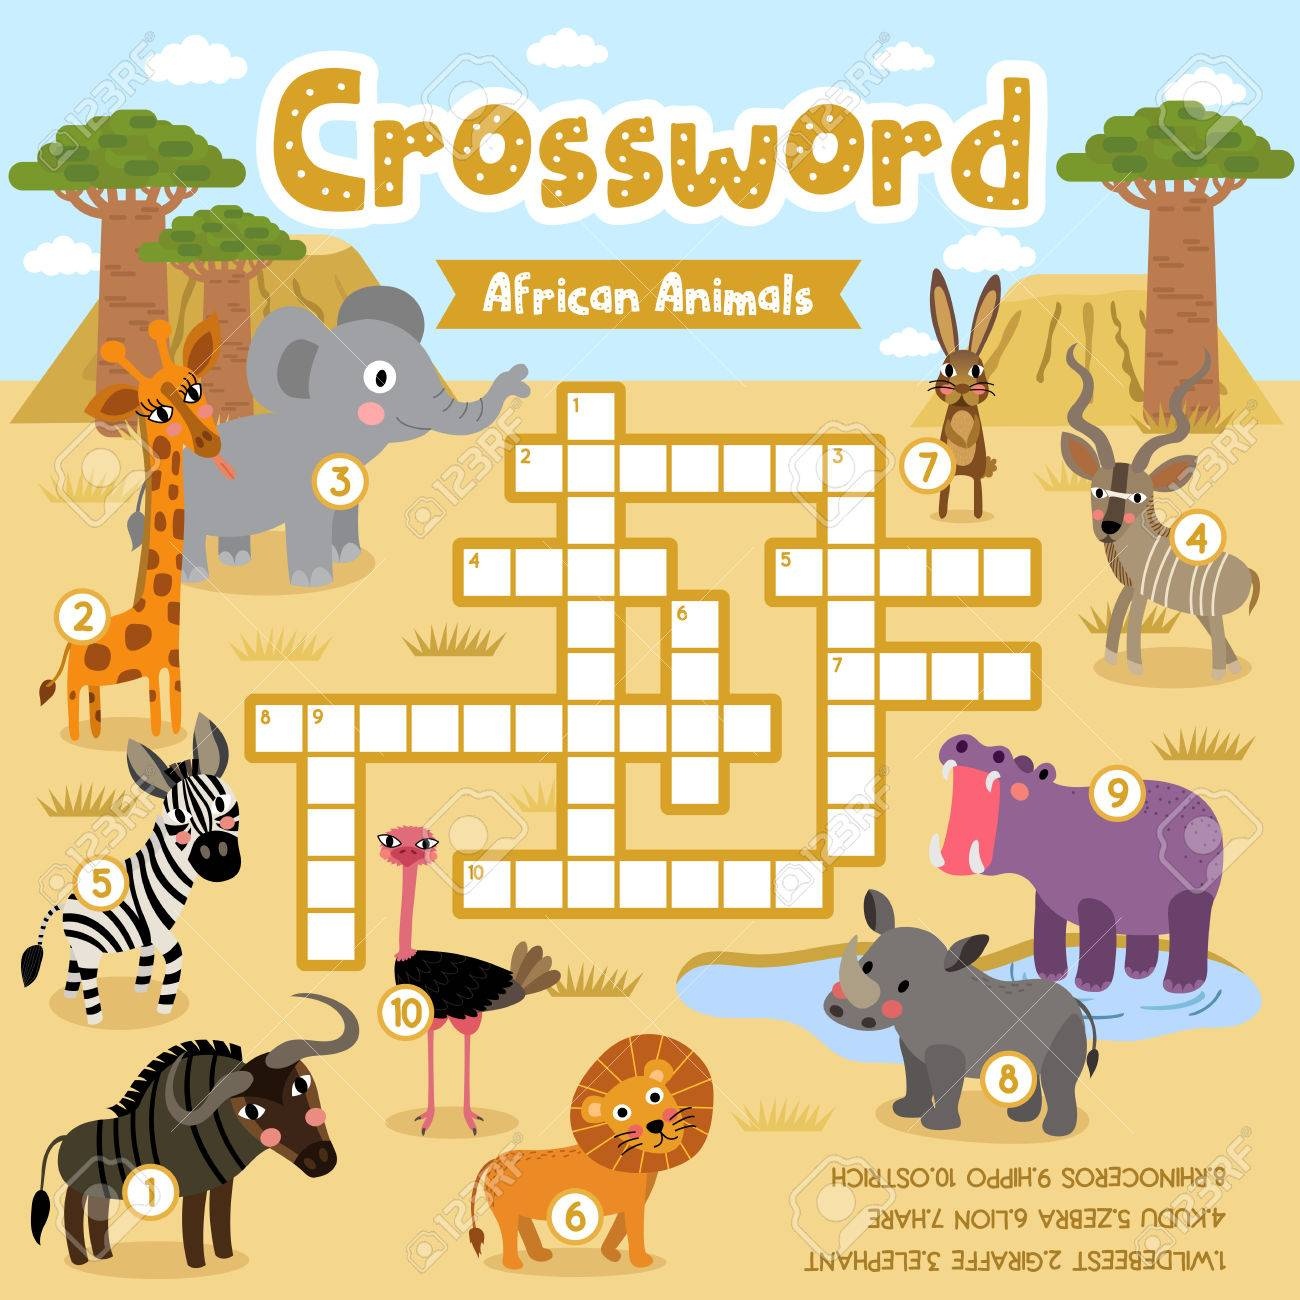 Crosswords Puzzle Game Of African Animals For Preschool Kids - Printable Animal Puzzle